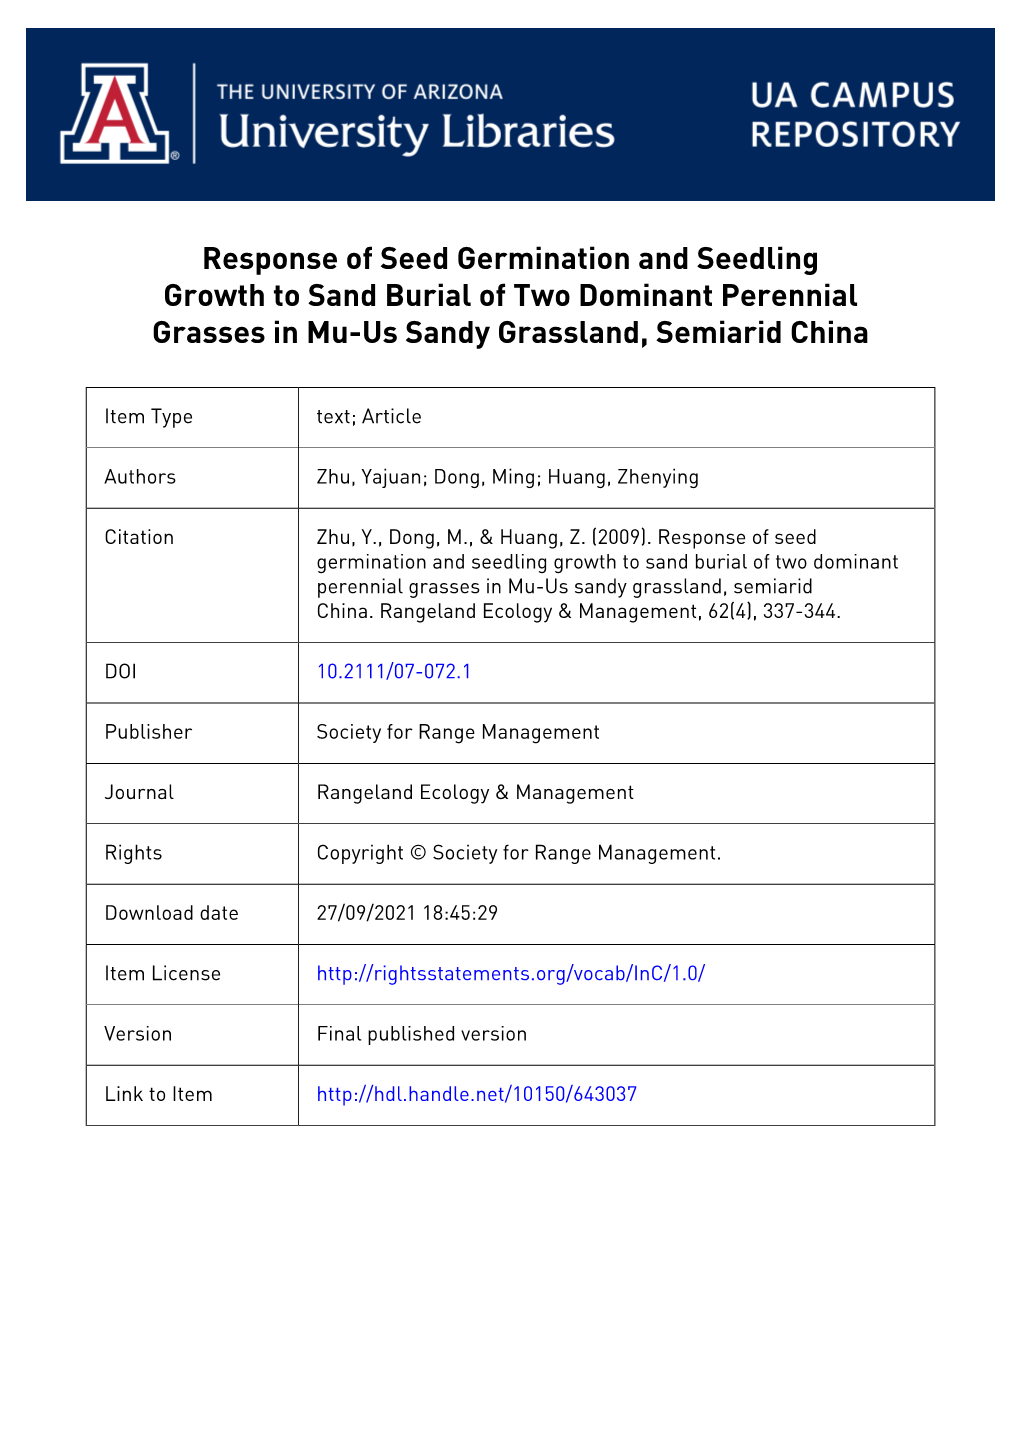 Response of Seed Germination and Seedling Growth to Sand Burial of Two Dominant Perennial Grasses in Mu-Us Sandy Grassland, Semiarid China